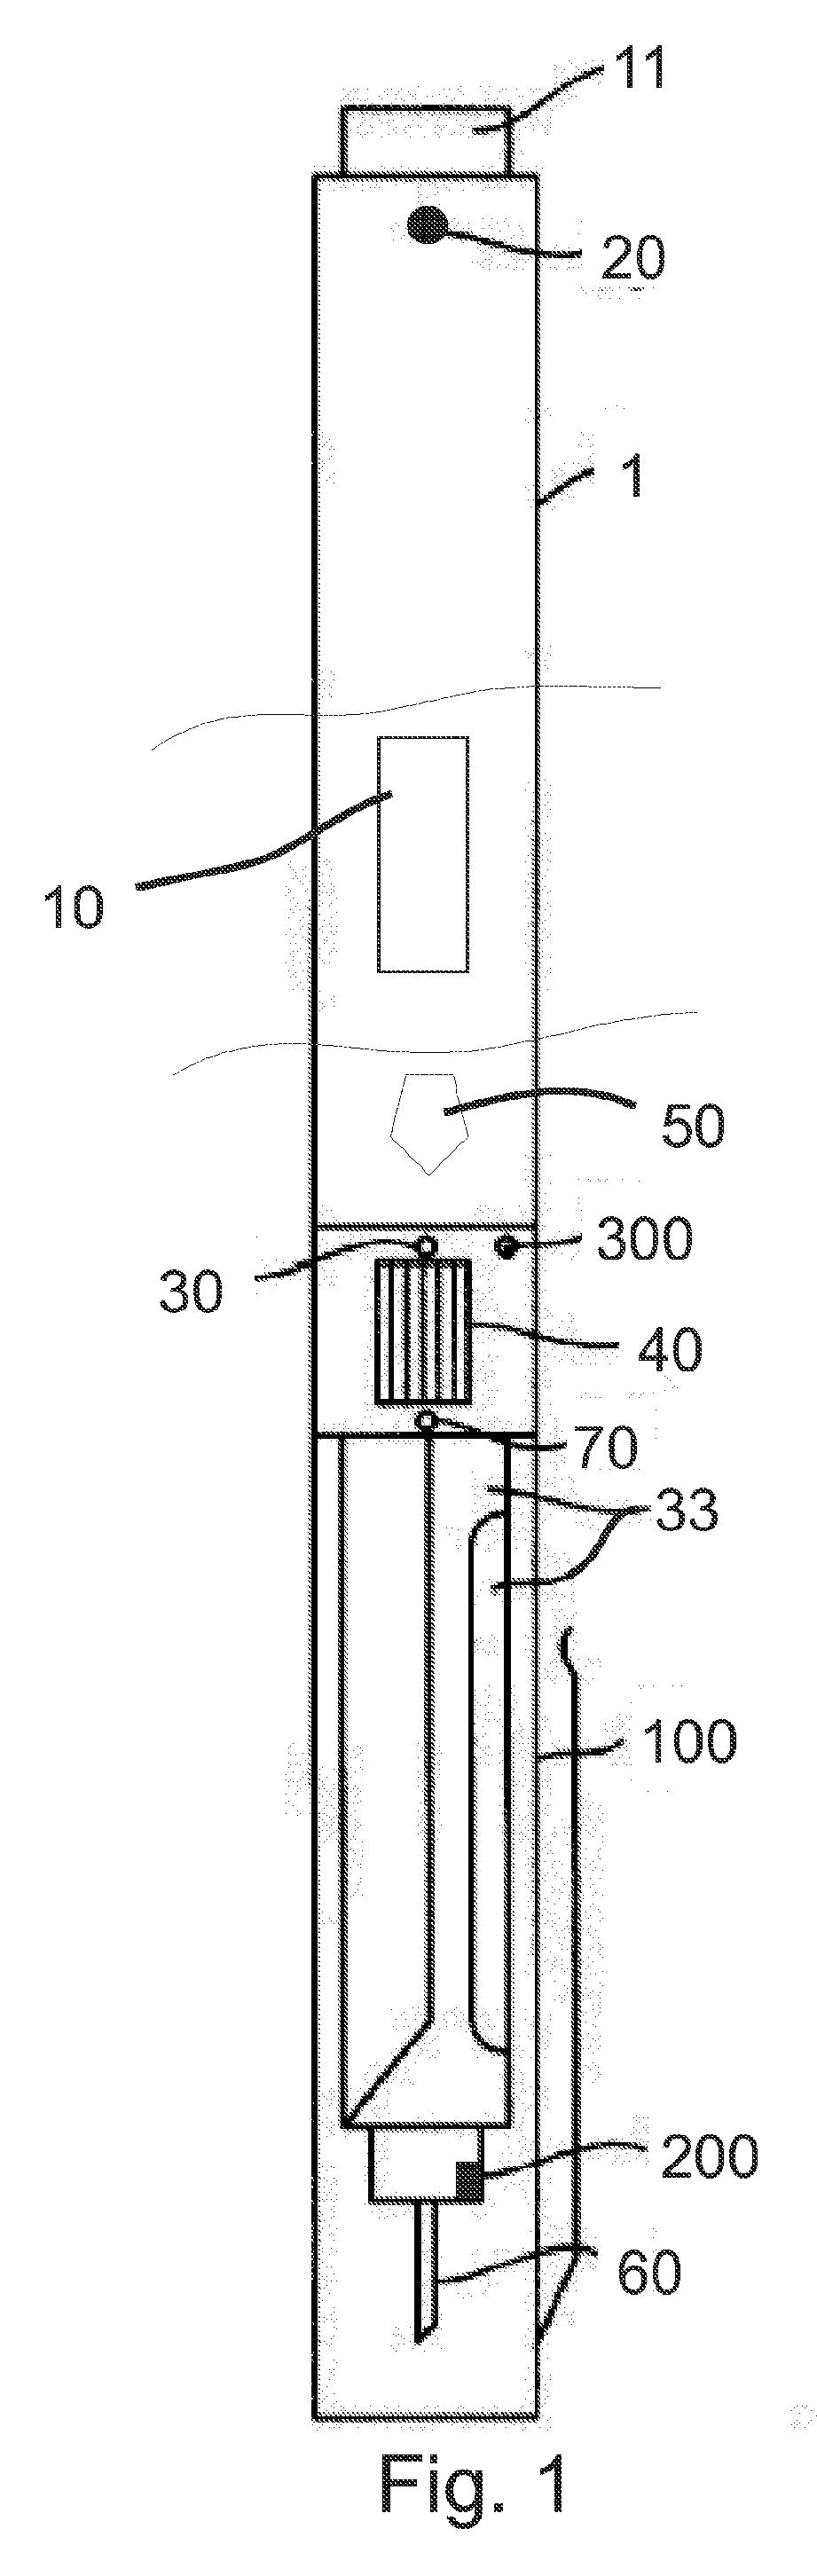 Method and Apparatus For Assisting Patients In Self-Administration of Medication